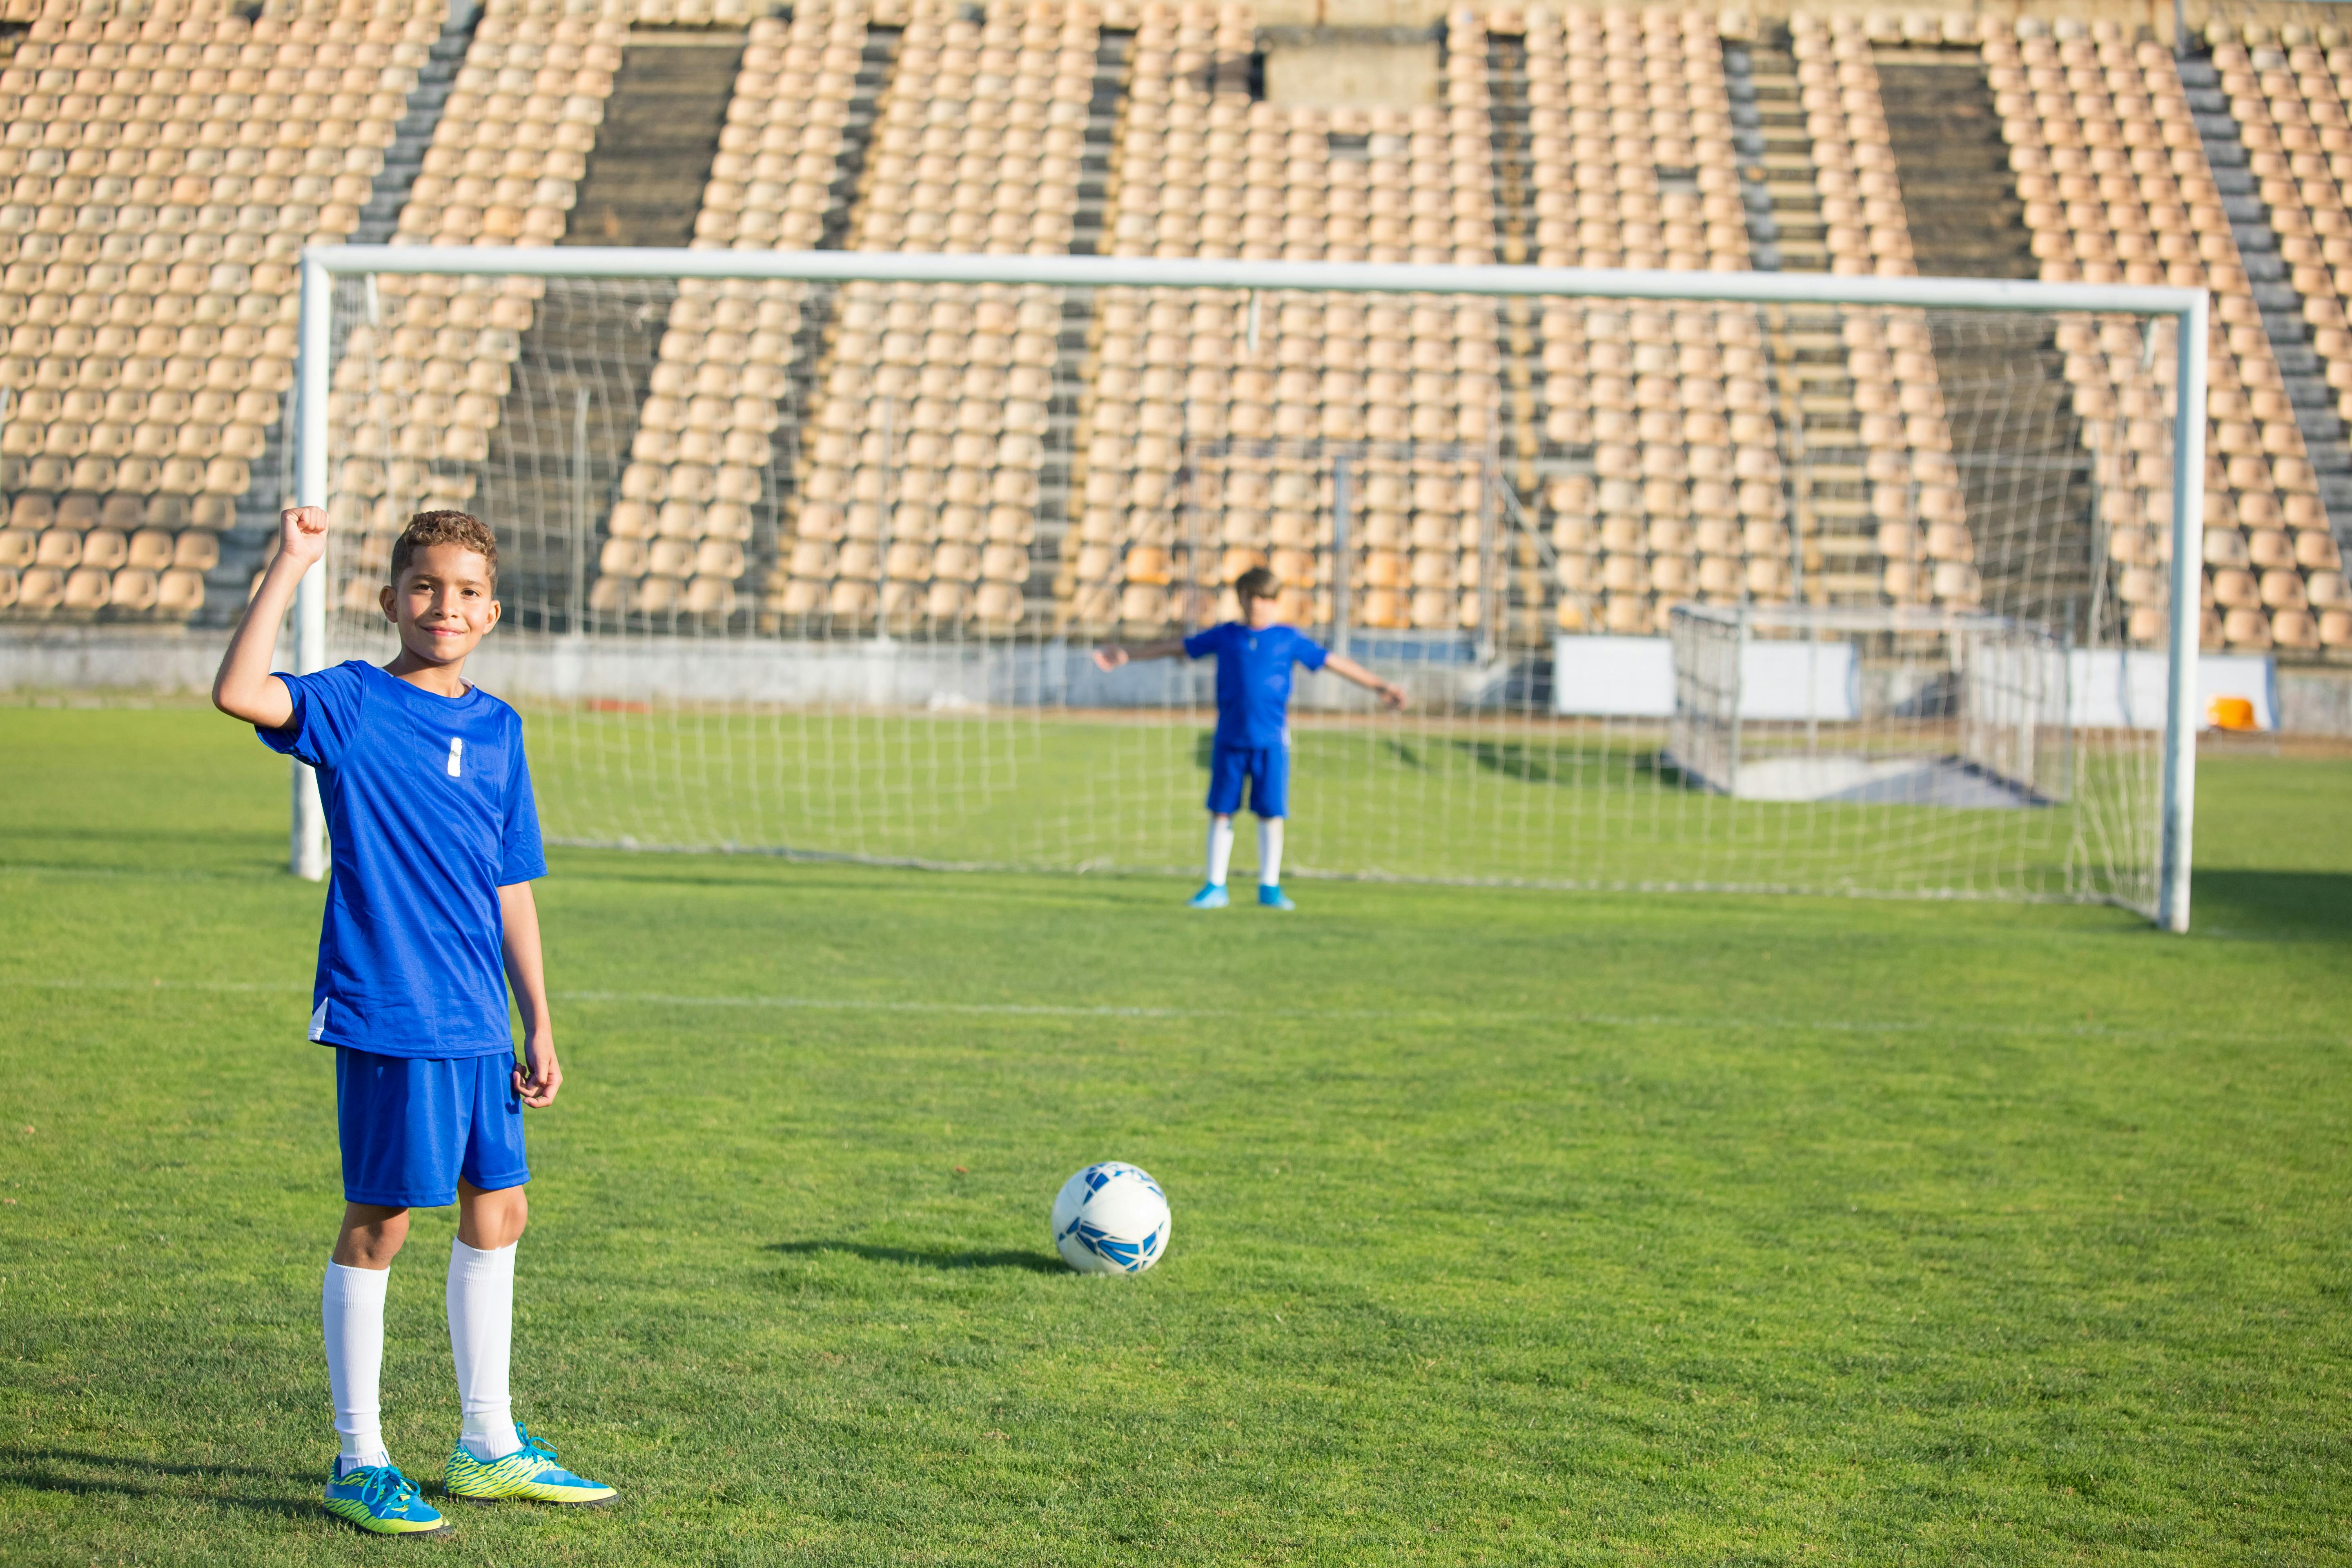 boy in blue jersey playing soccer